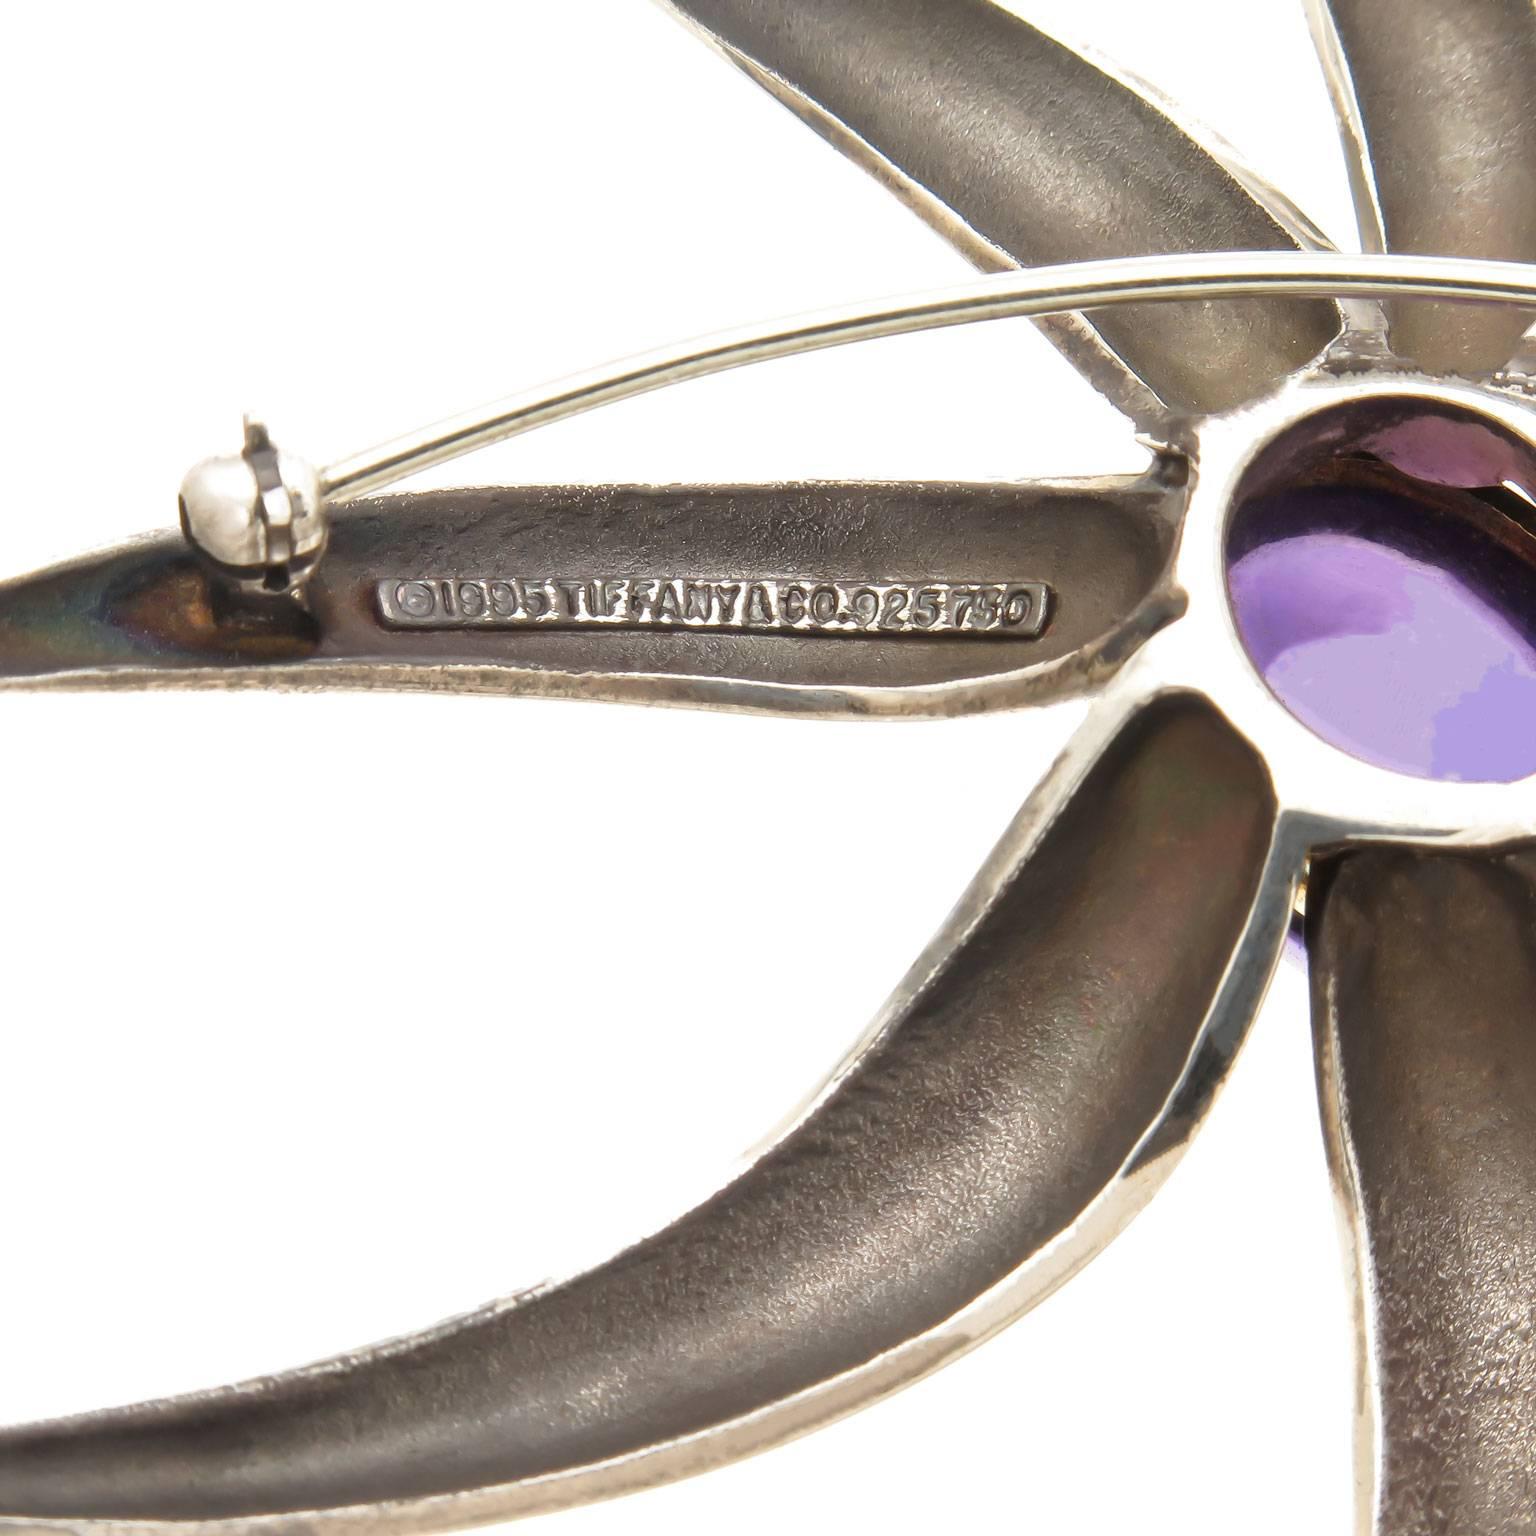 Circa 1990s Tiffany & Co Sterling Silver and 18k yellow Gold Fireworks collection Brooch. Measuring 3 X 2 1/2 inch and centrally set with a cabochon Amethyst measuring 1/2 X 3/8 inch, approximately 4 Carats. 